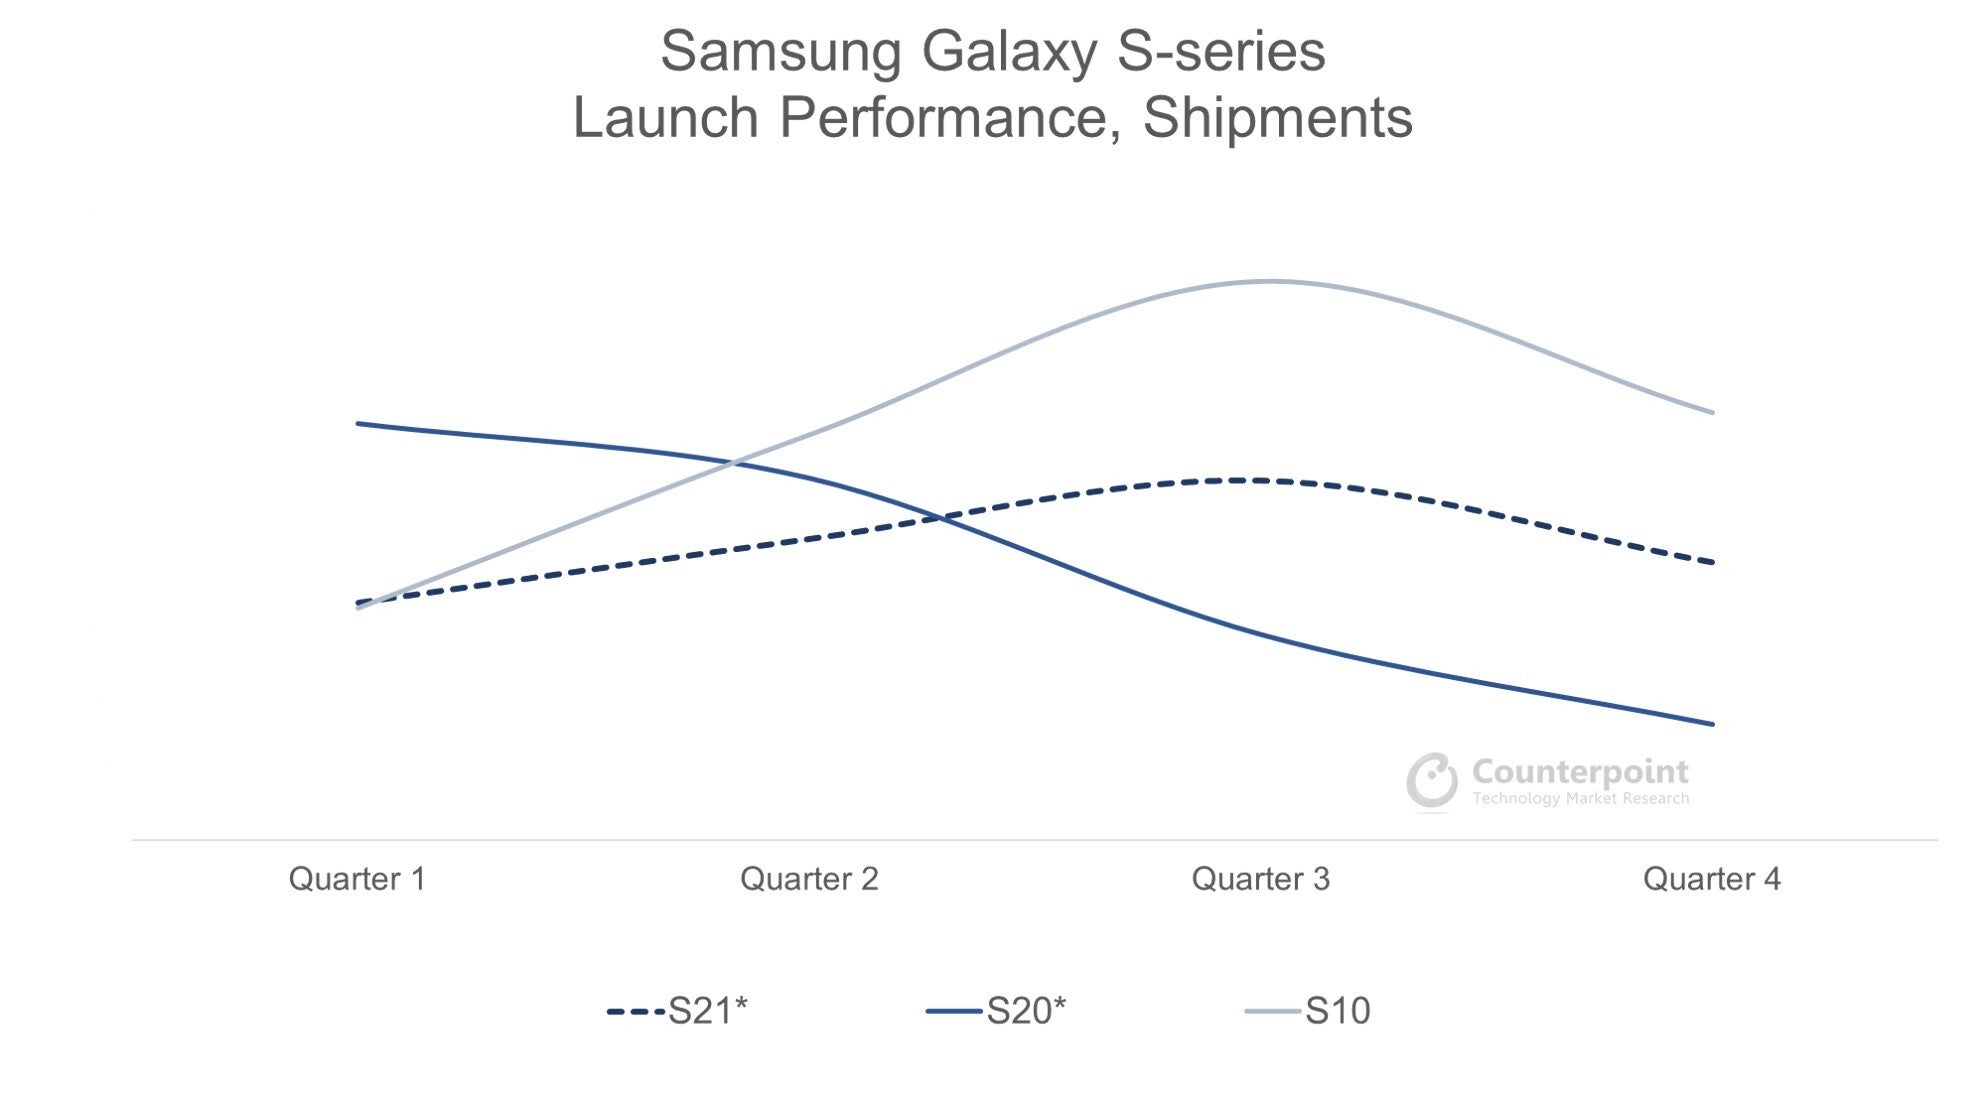 &amp;nbsp;Source -Counterpoint Research. *Includes forecasted quarters.  - The Galaxy S21 hits the same price sweet spot as the iPhone 12, but there are more challenges ahead